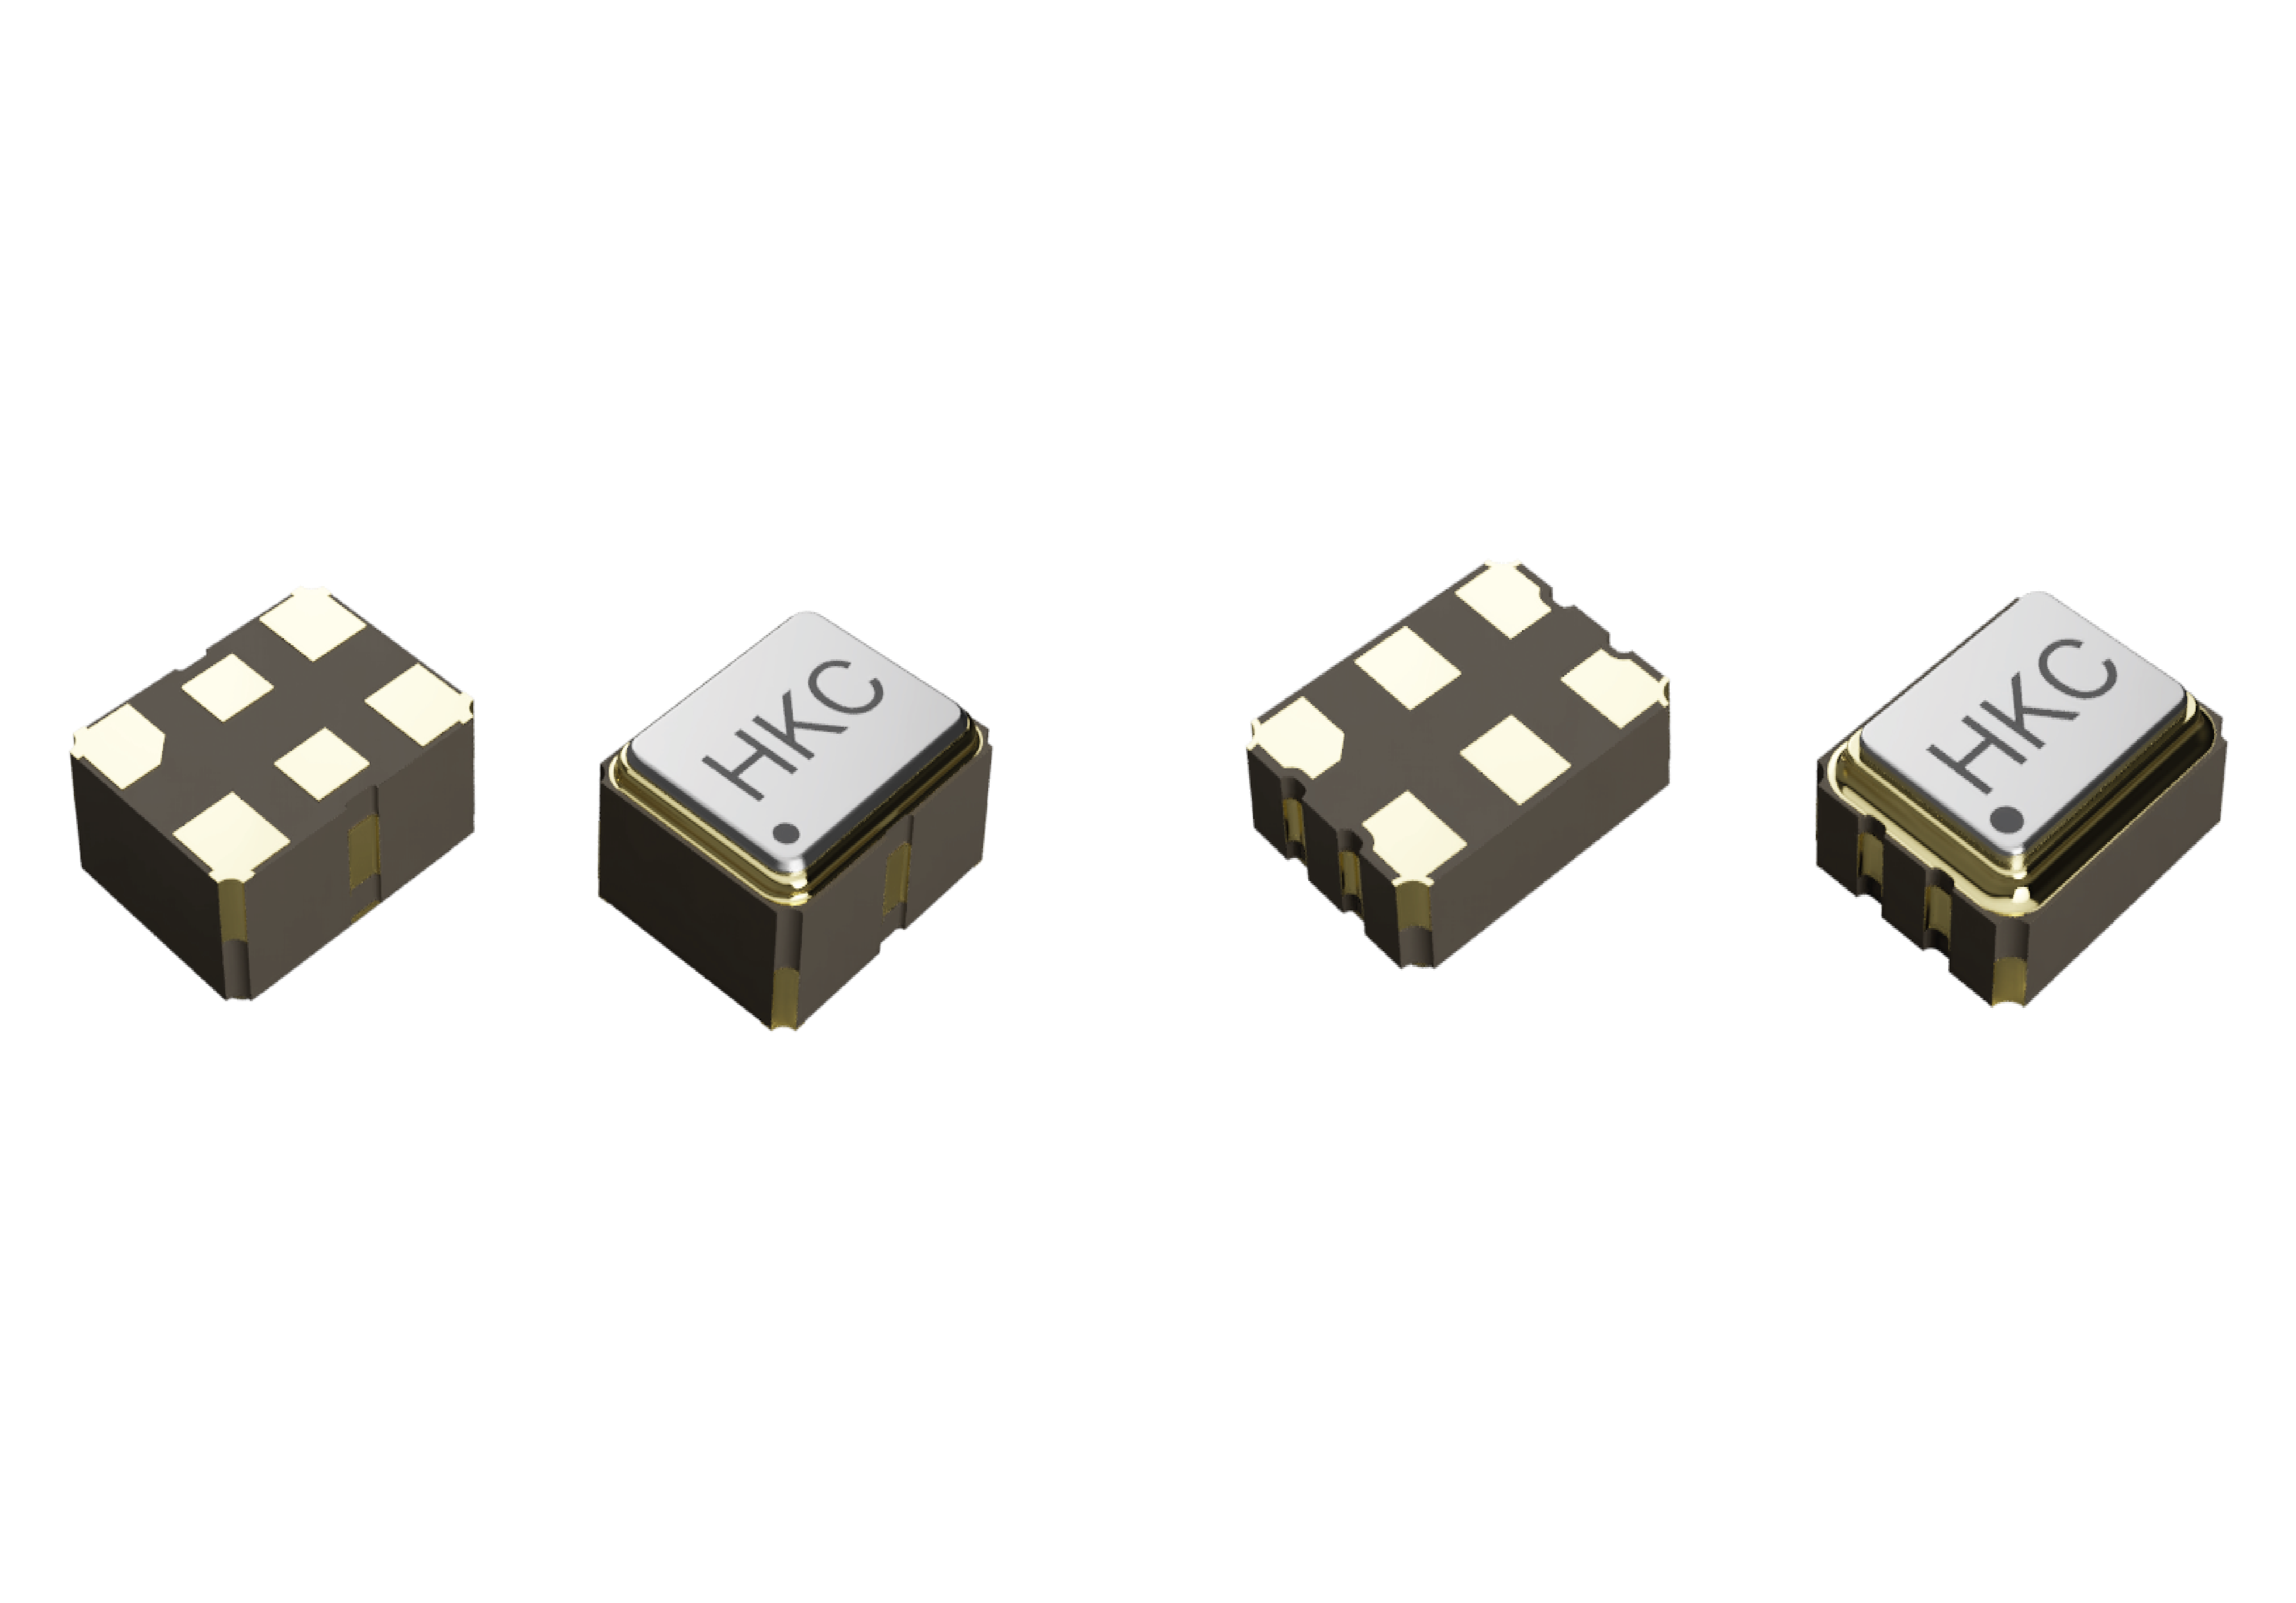 Thanks to their high strength, the high-frequency oscillators are particularly reliable.